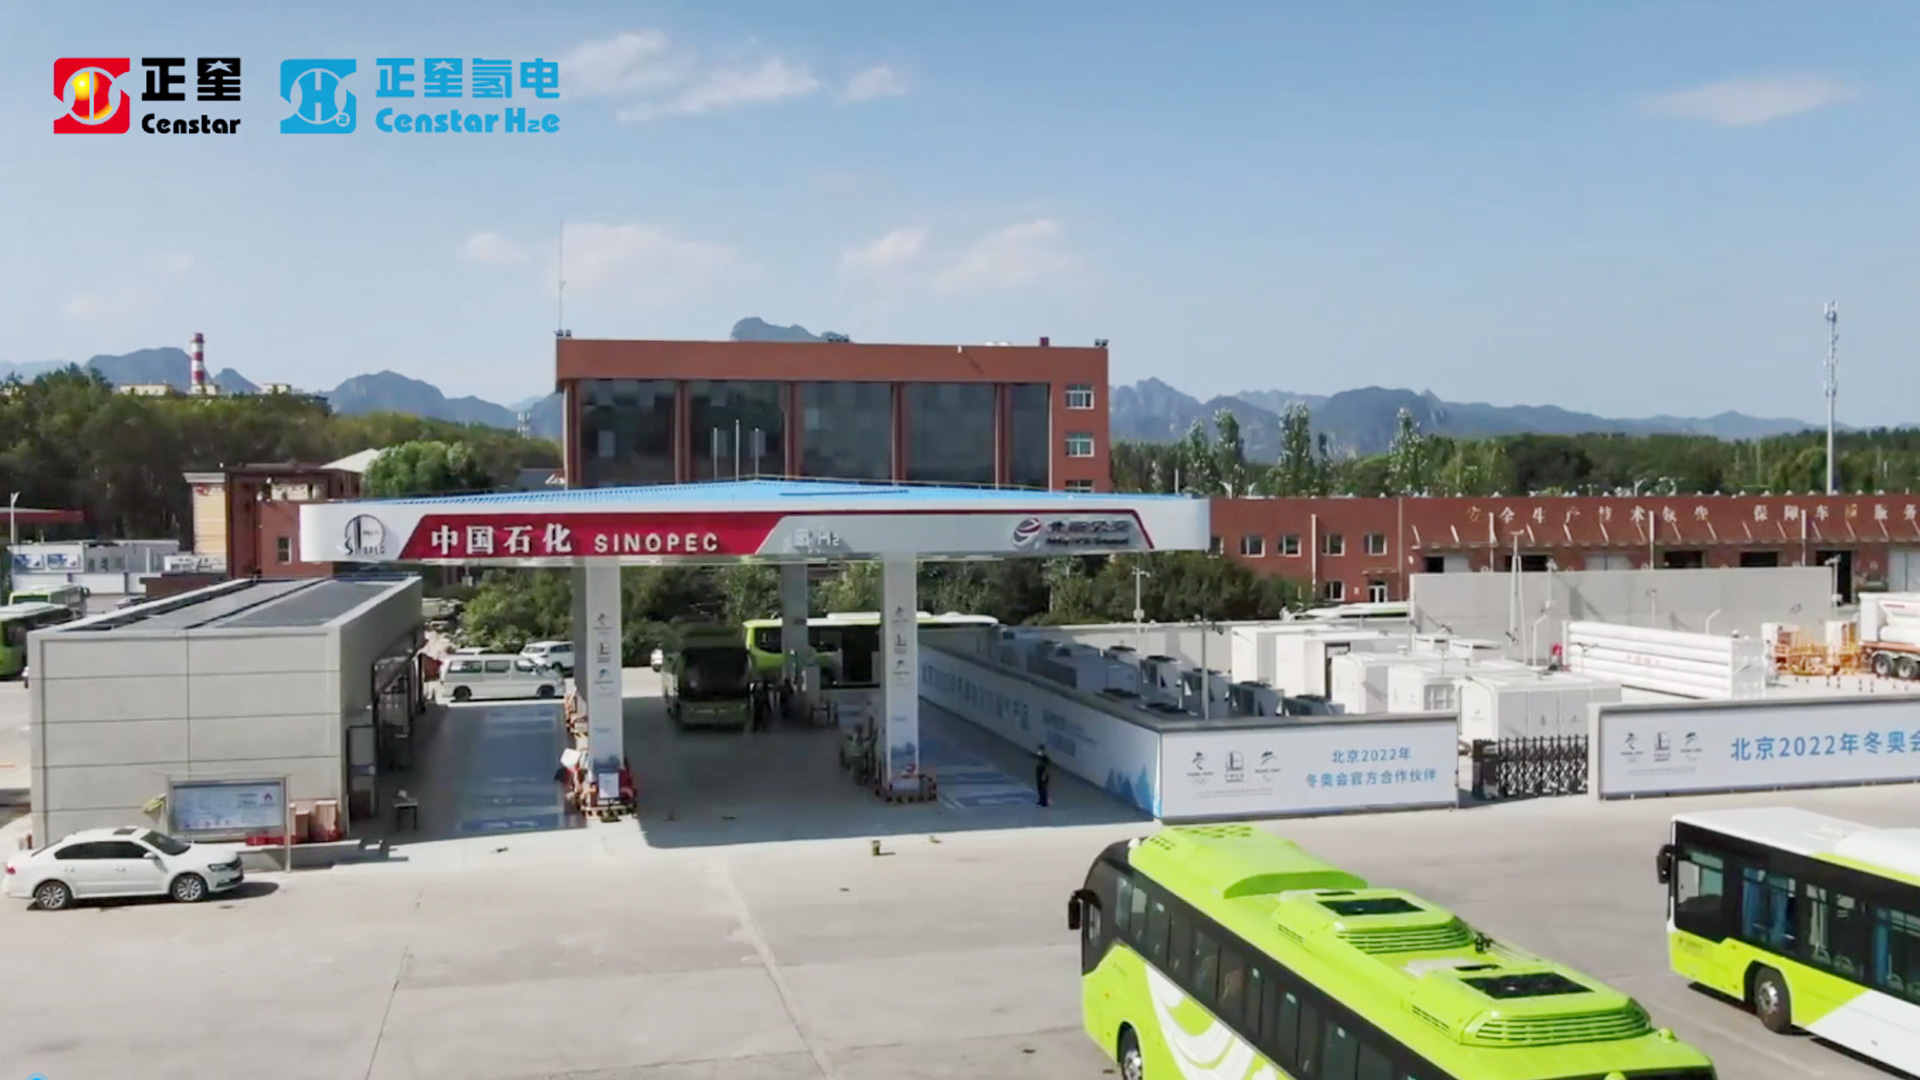 Censtar serves the first Sinopec hydrogen refueling station for the Winter Olympics